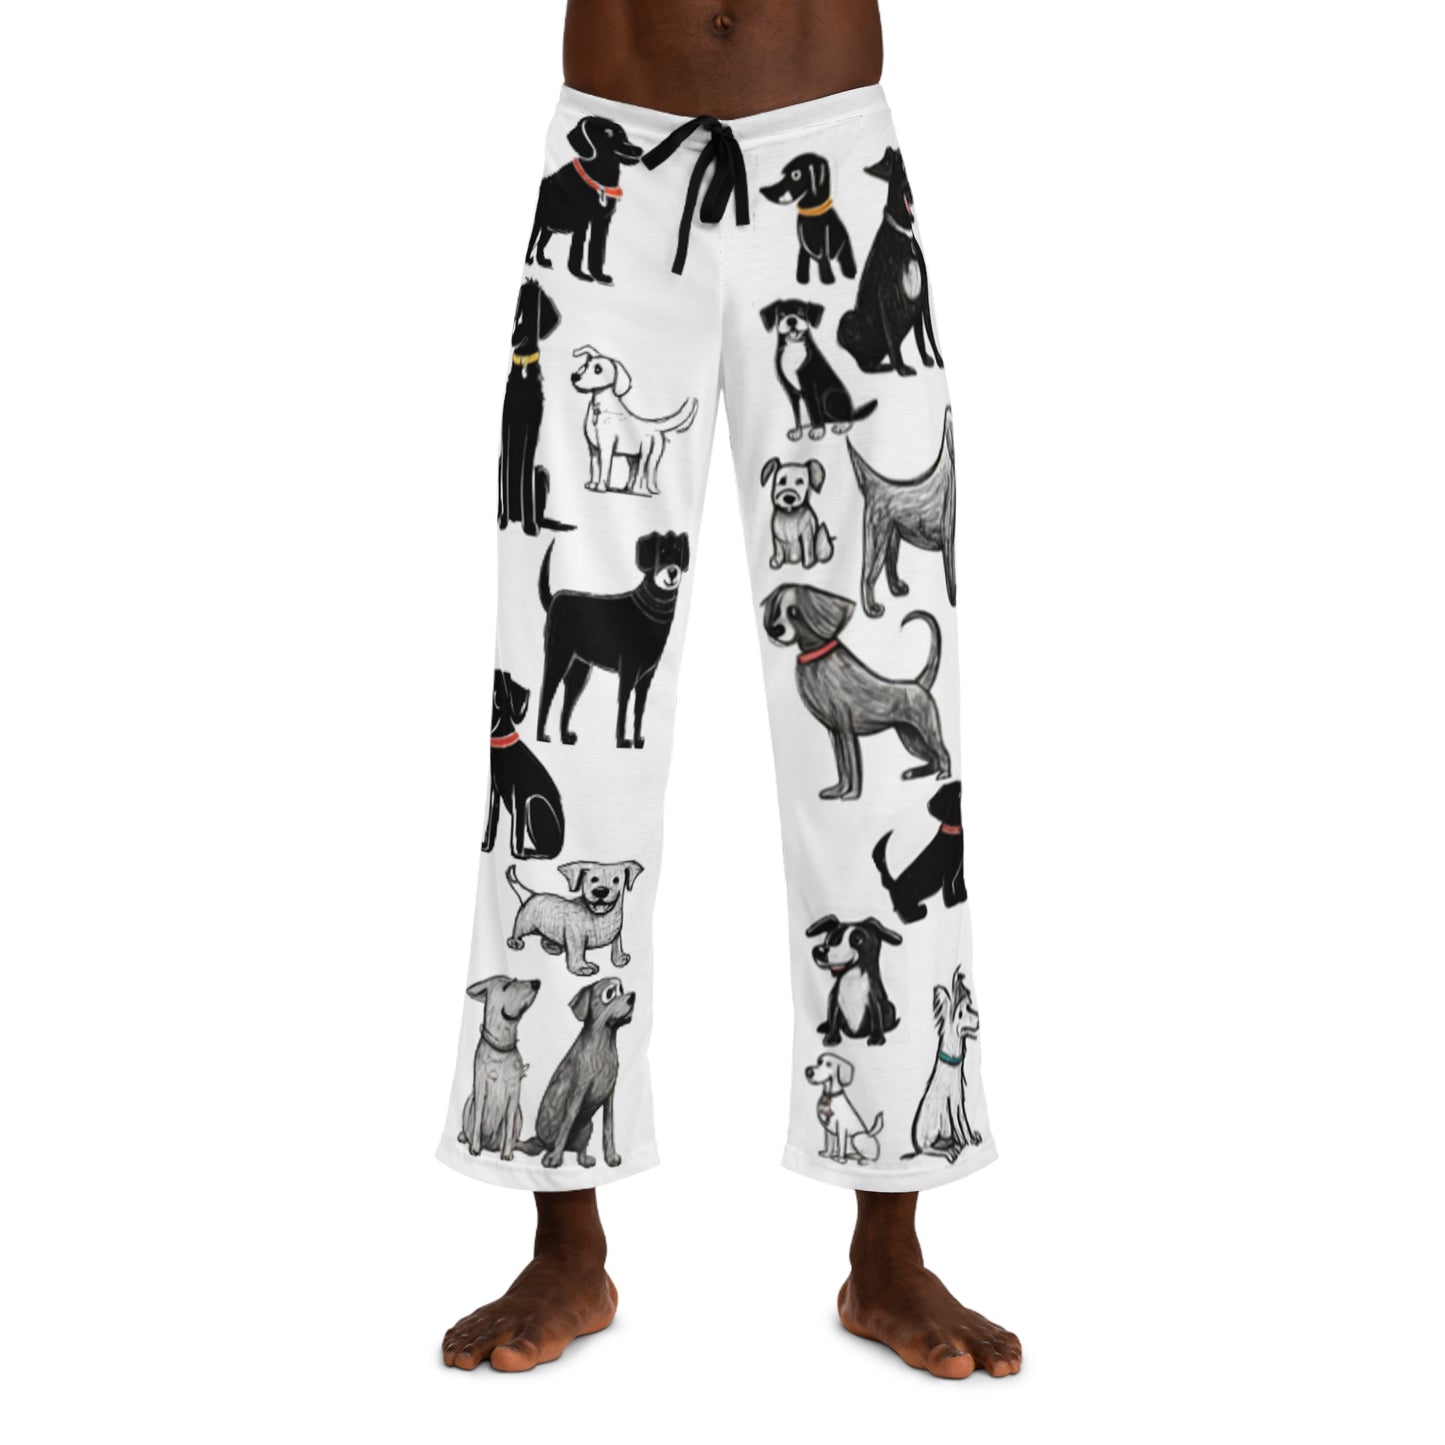 Doggy Men's PJ bottoms, Pajama Pants, Graphic PJs, Gifts for Him, Dog Dad Cute Cool